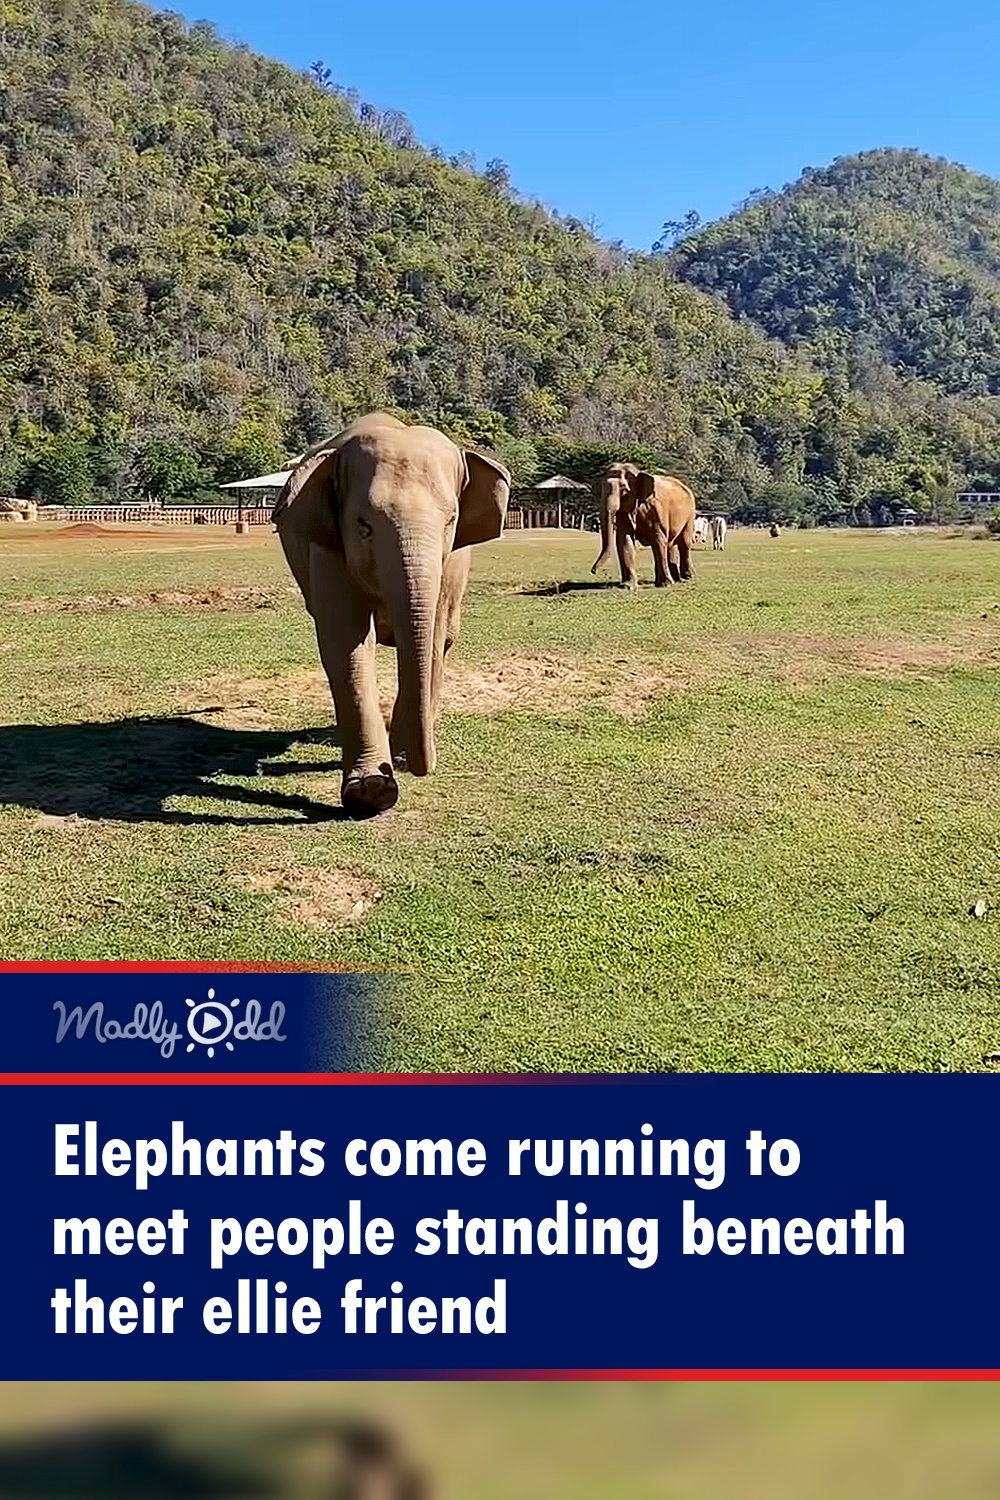 Elephants come running to meet people standing beneath their ellie friend